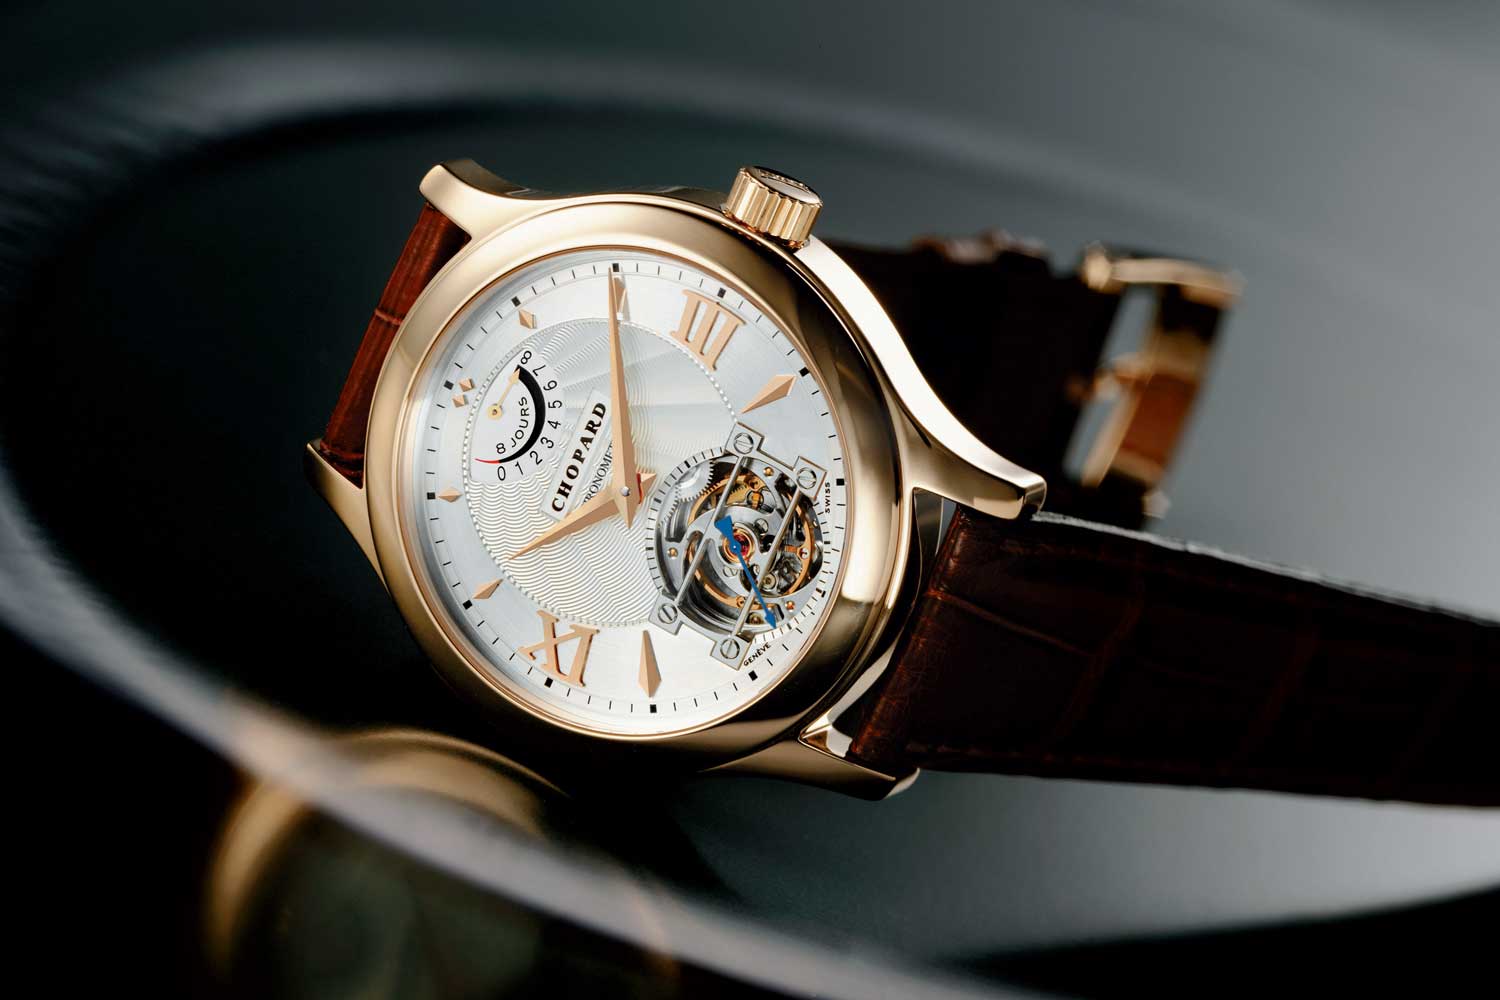 In 2004, the L.U.C Tourbillon was unveiled, which at that point in time unlike the majority of other tourbillons beat at 4Hz and was the only COSC-certified tourbillon on the market aside from Patek Philippe’s